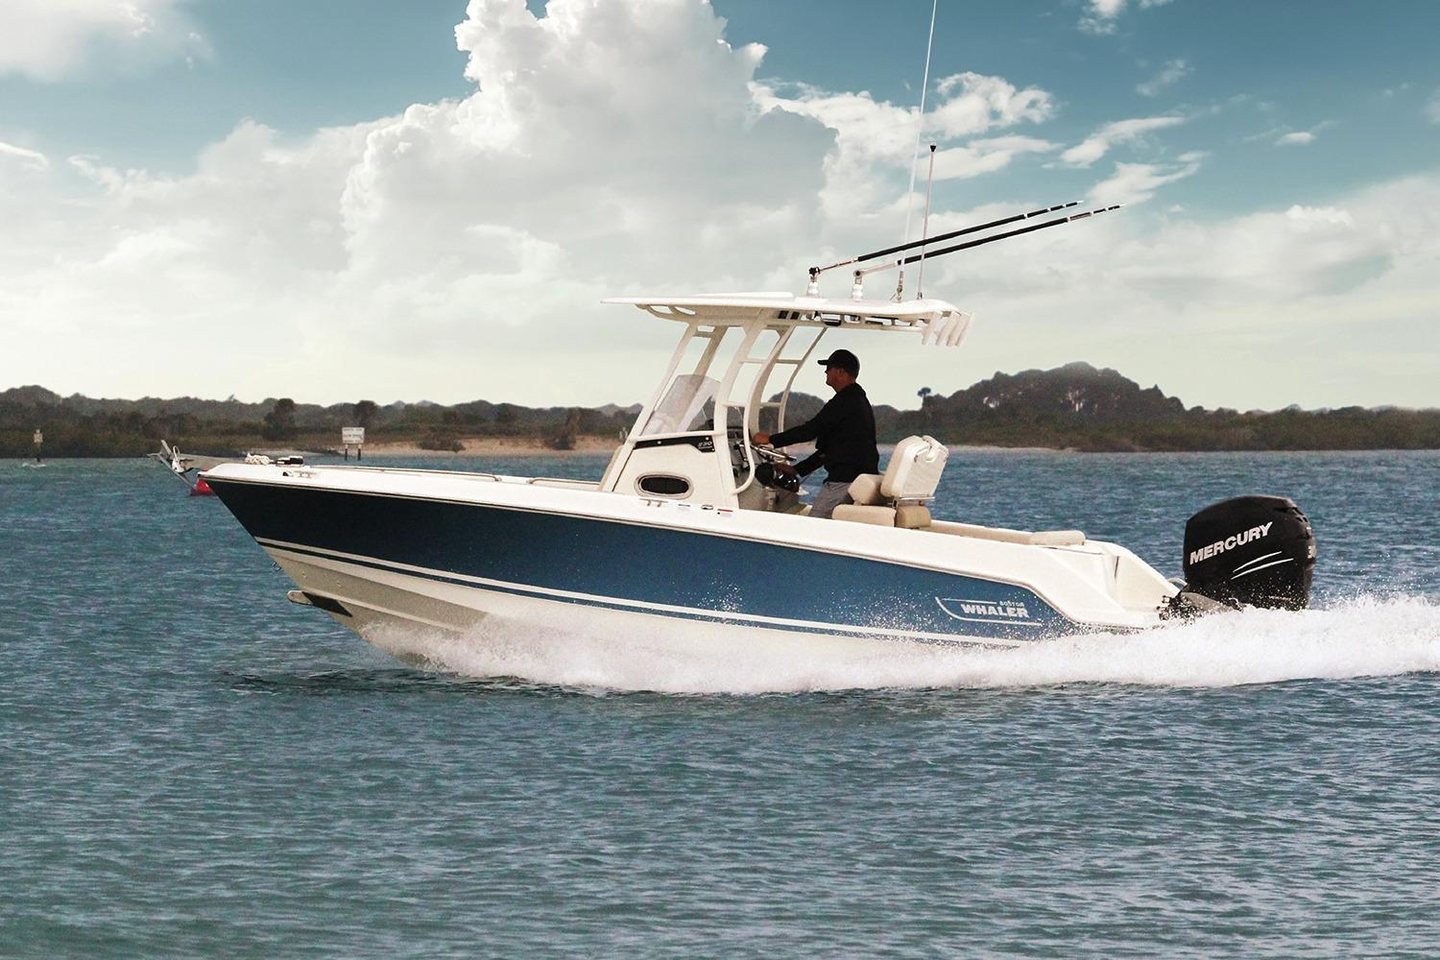 360 VR Virtual Tours of the Boston Whaler 230 Outrage